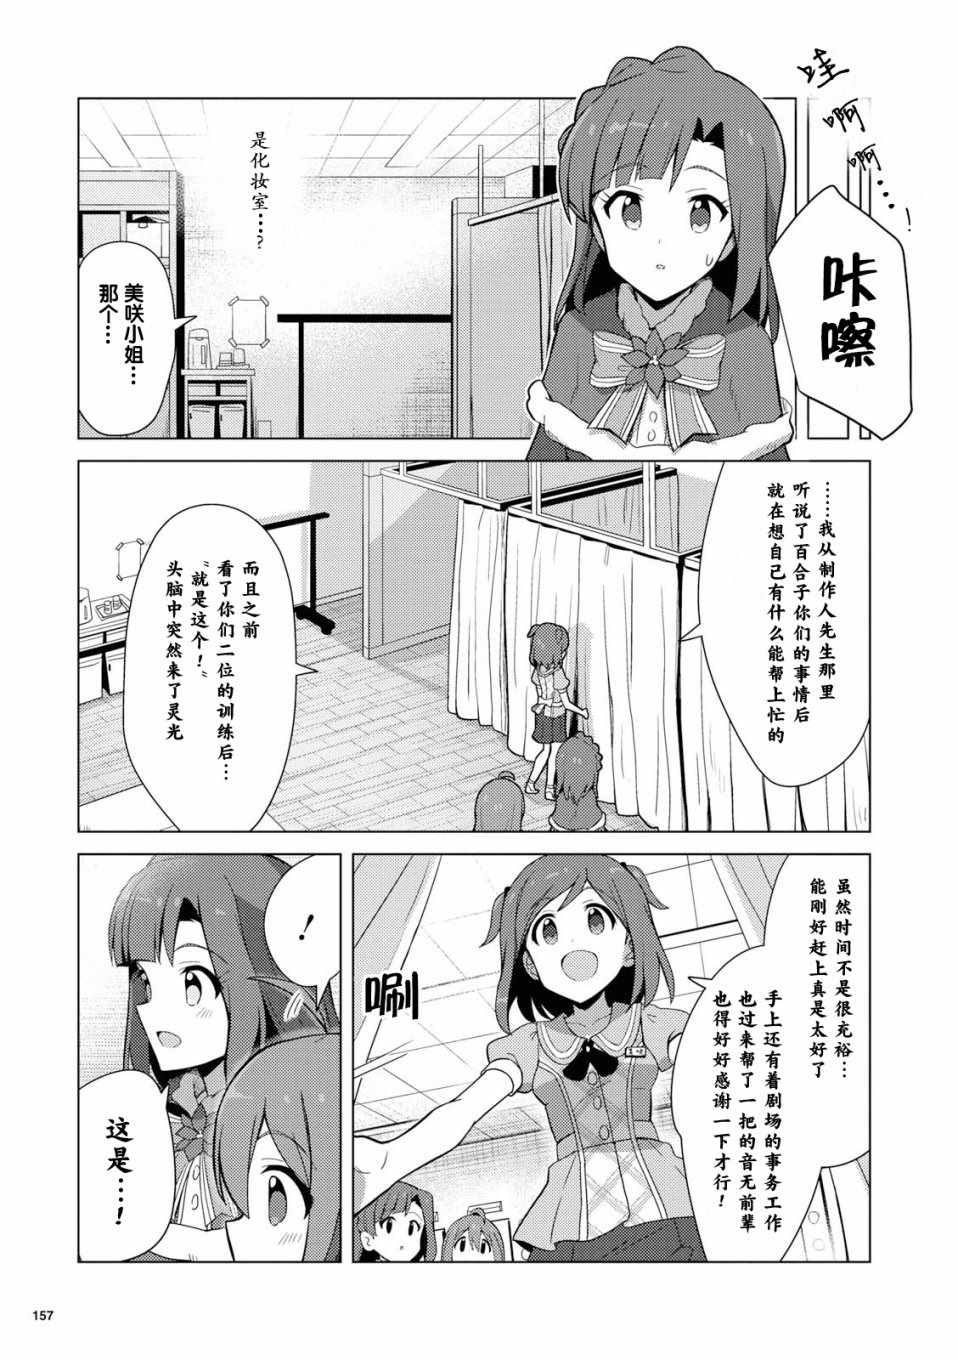 《THE IDOLM@STER MILLION LIVE! Brand New Song》漫画 Brand New Song 015集